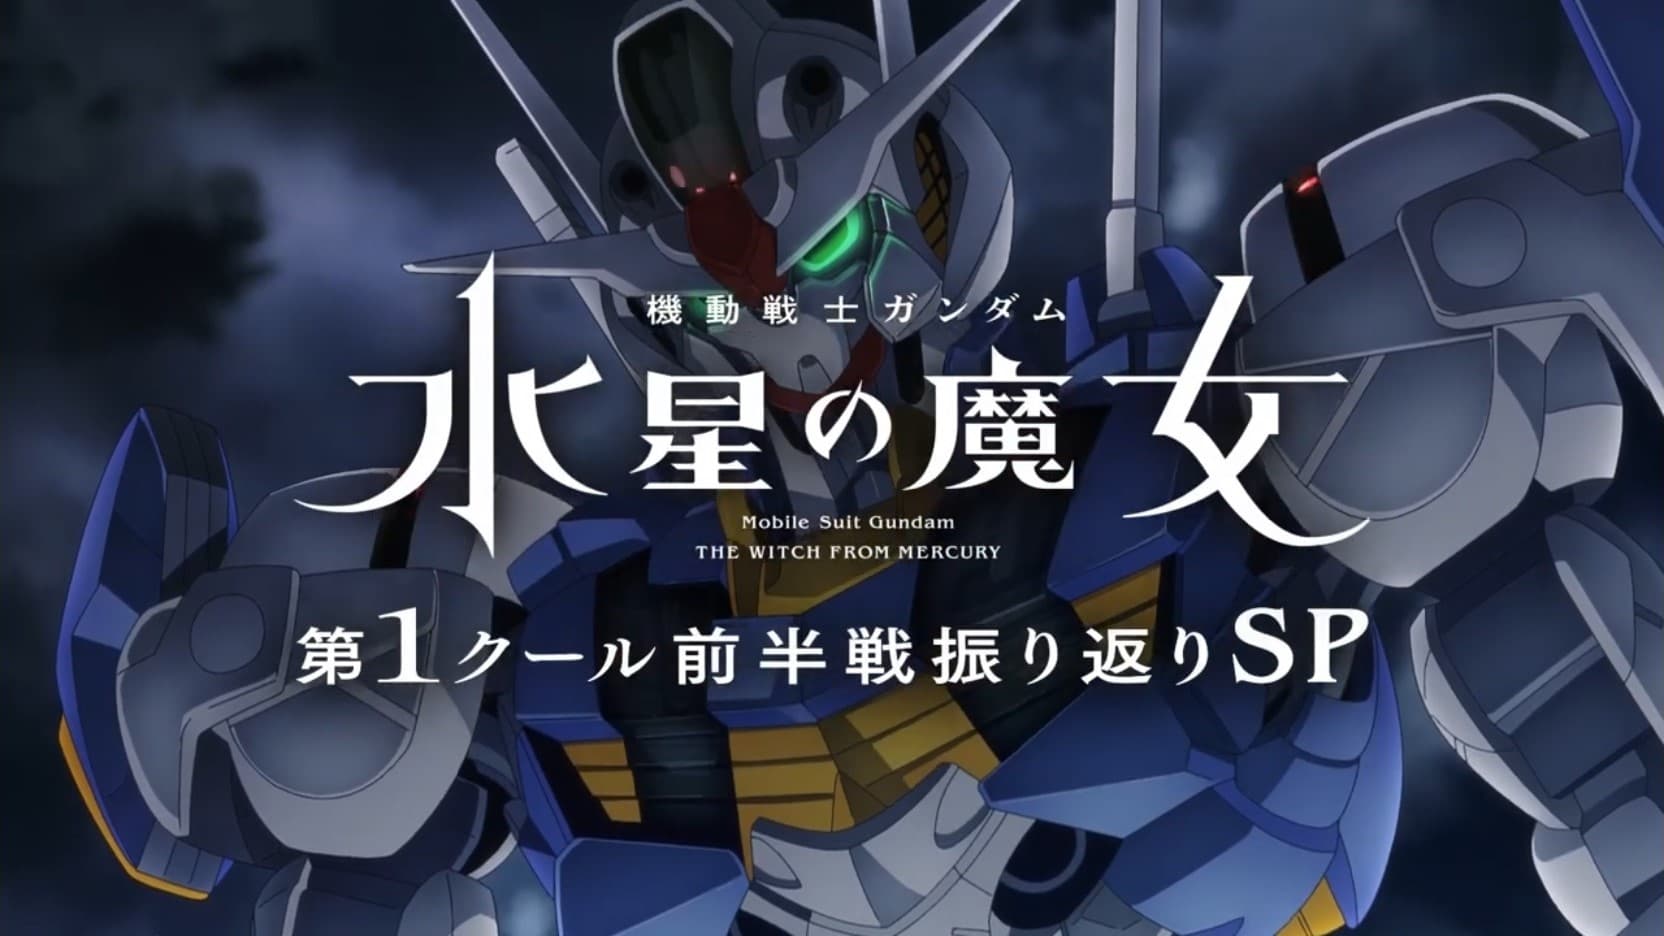 Mobile Suit Gundam: The Witch from Mercury 0x3